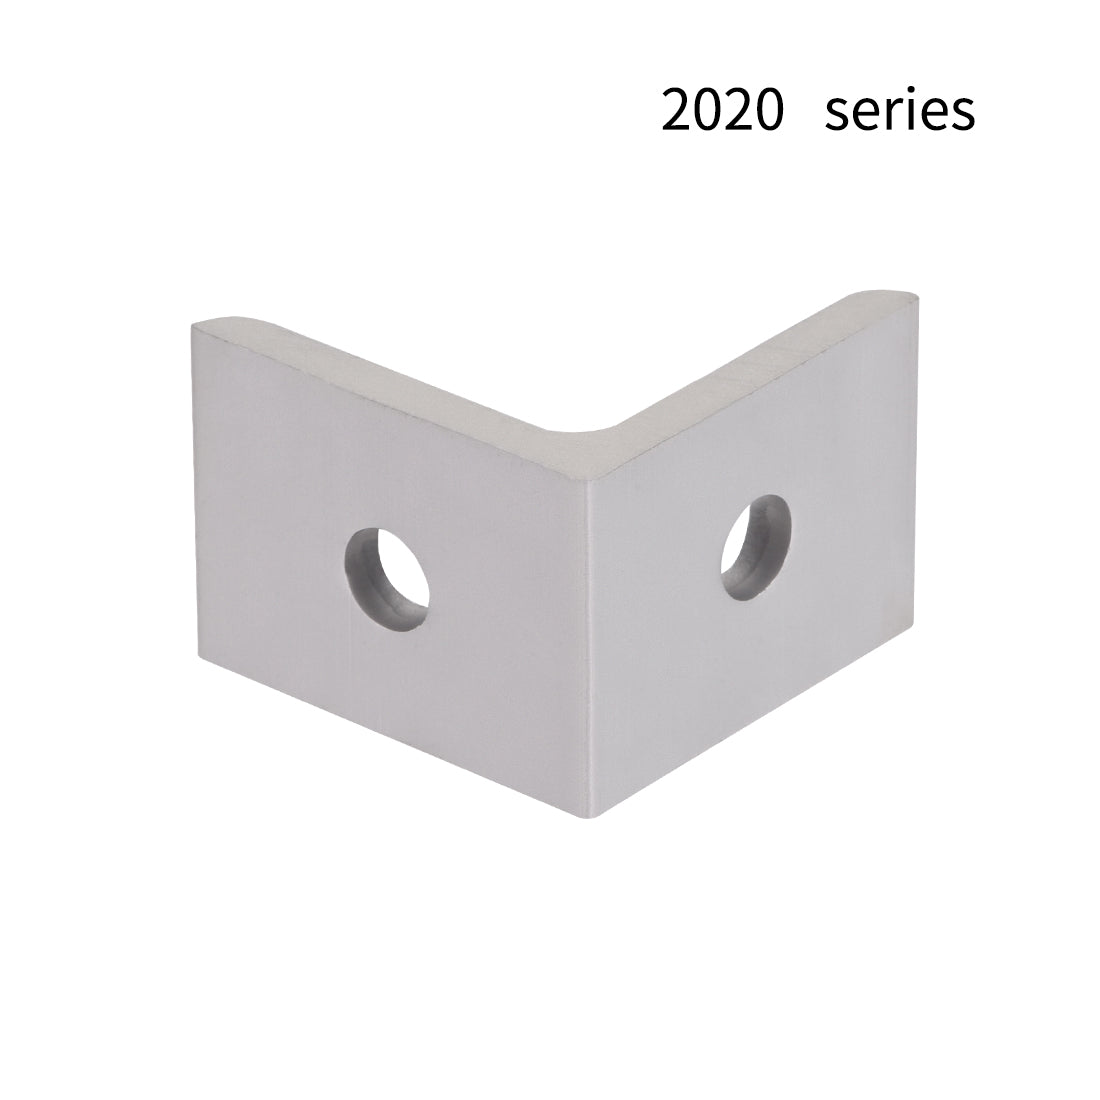 uxcell Uxcell Inside Corner Bracket for 2020 Series Aluminum Extrusion Profile with Slot 6mm, 10 Pcs